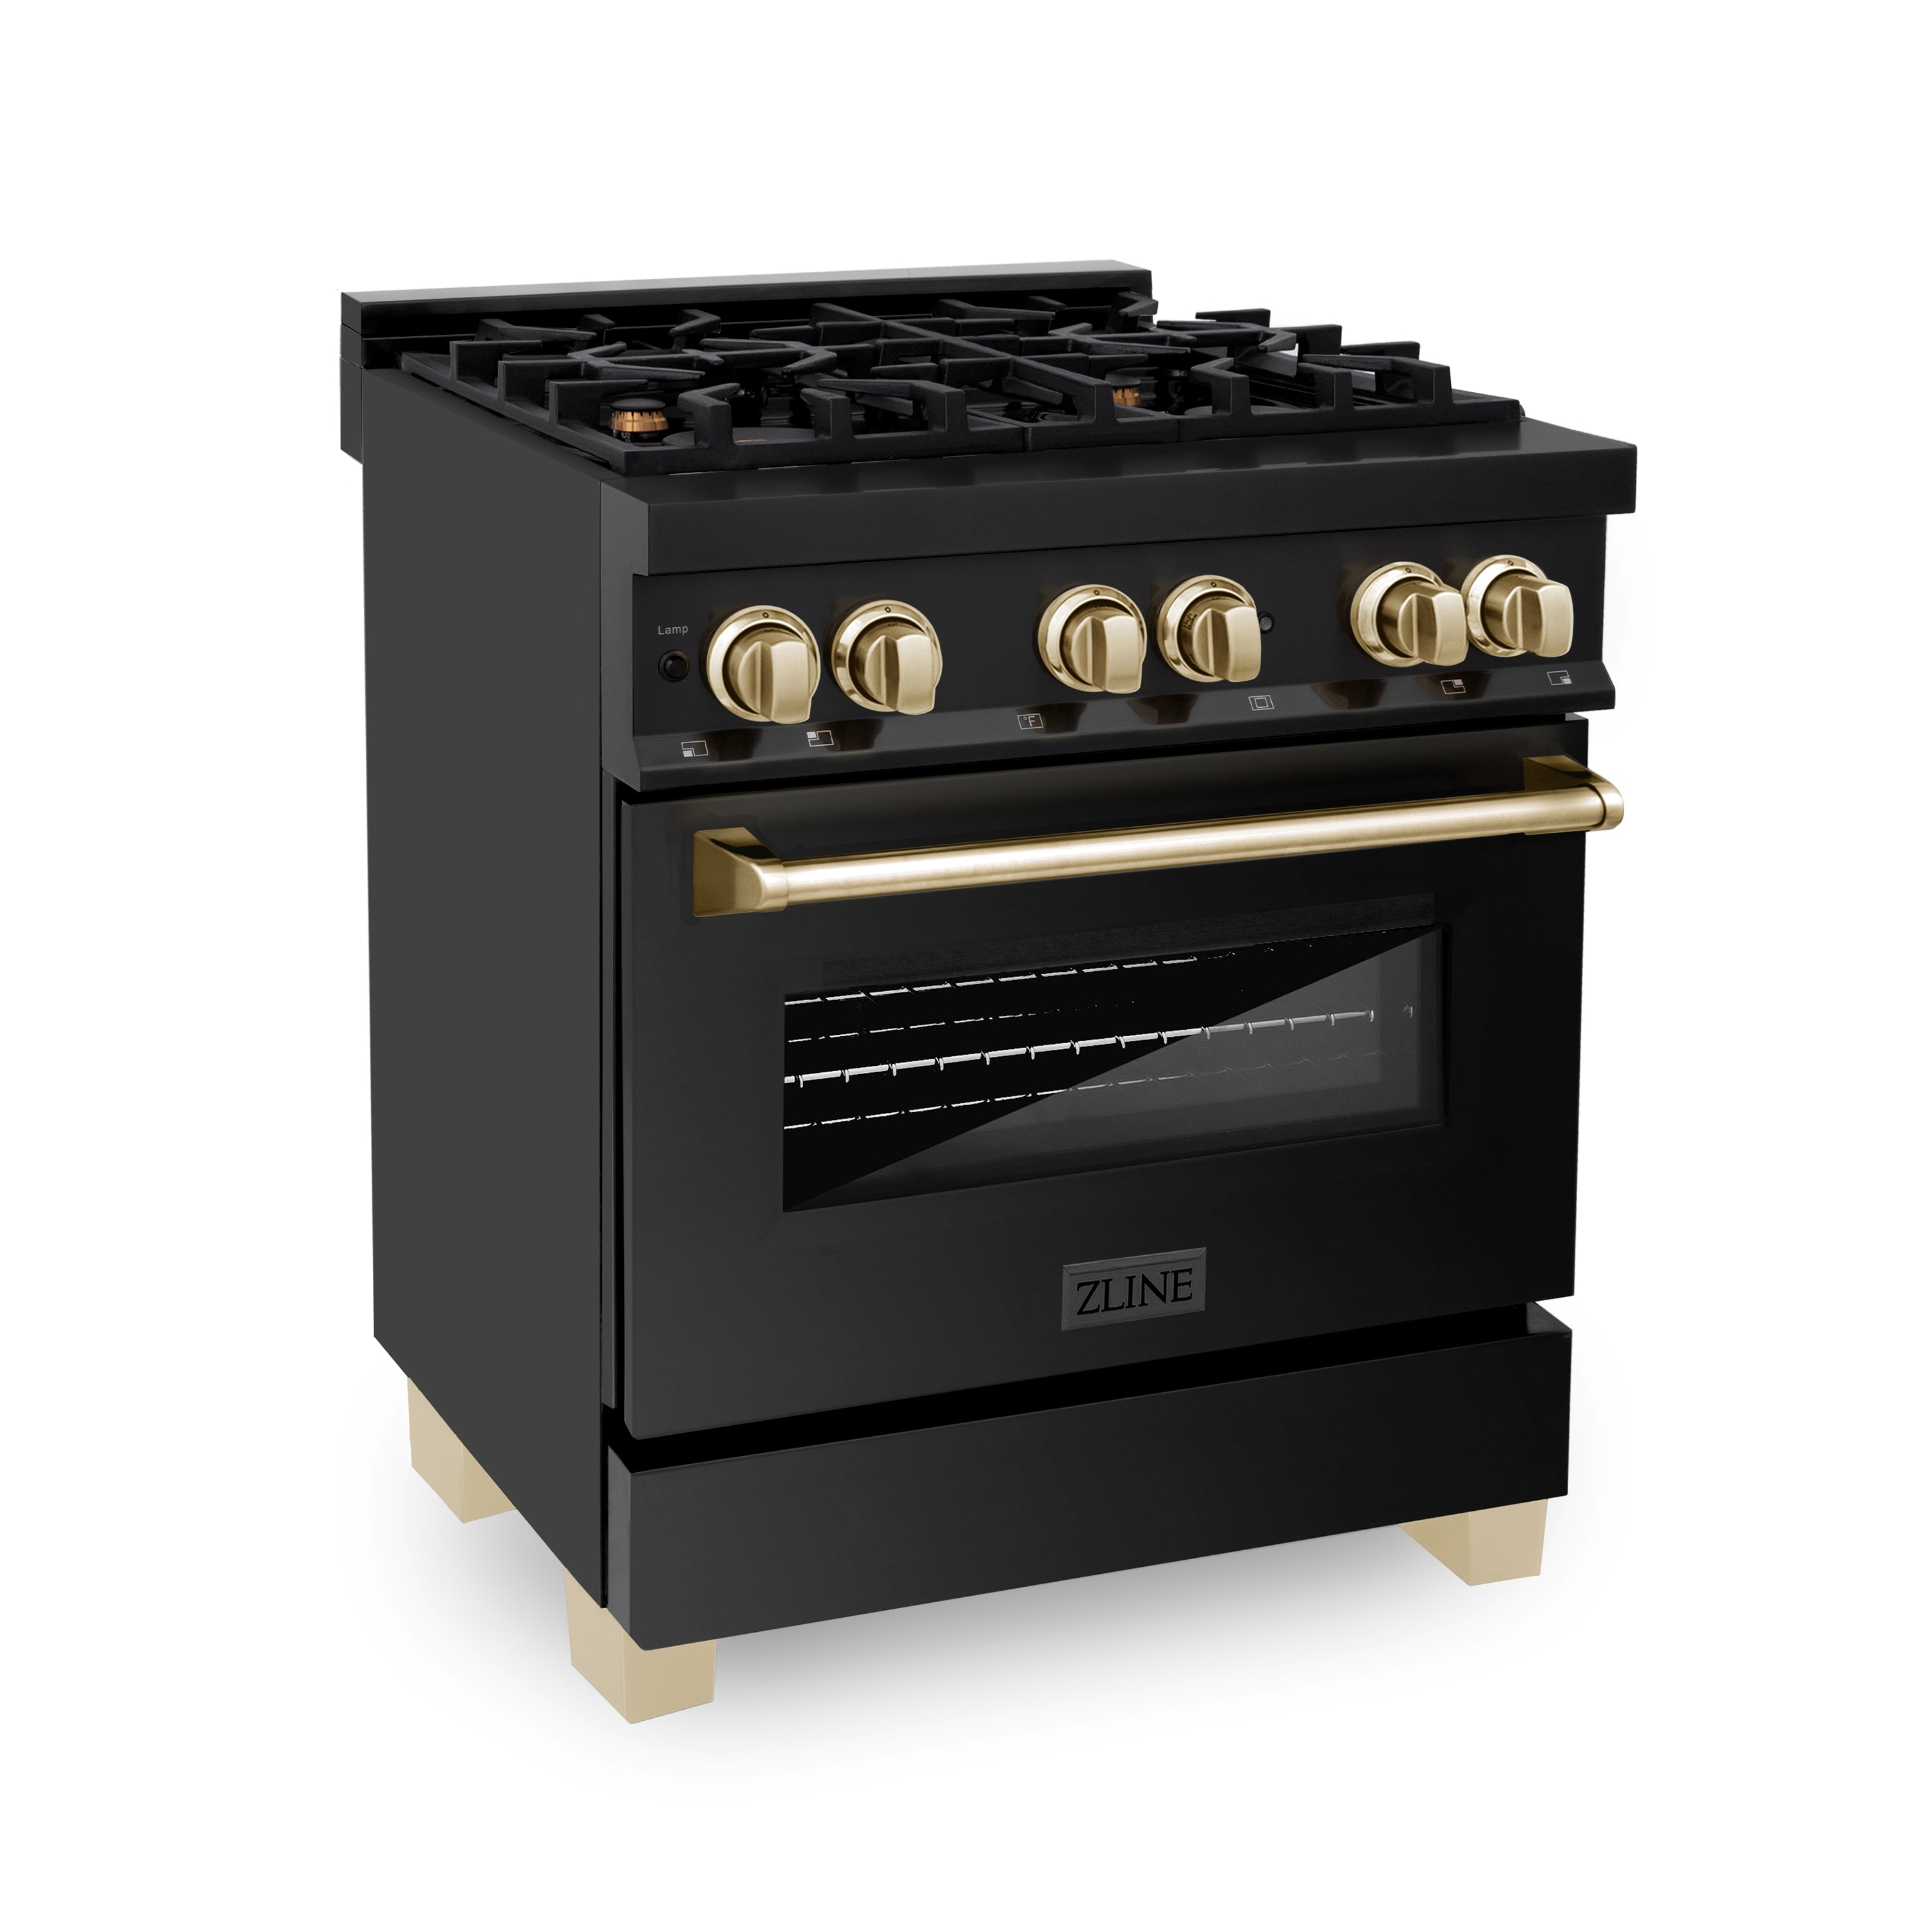 ZLINE Autograph Edition 30" 4.0 cu. ft. Dual Fuel Range with Gas Stove and Electric Oven in Black Stainless Steel with Polished Gold Accents (RABZ-30-G)